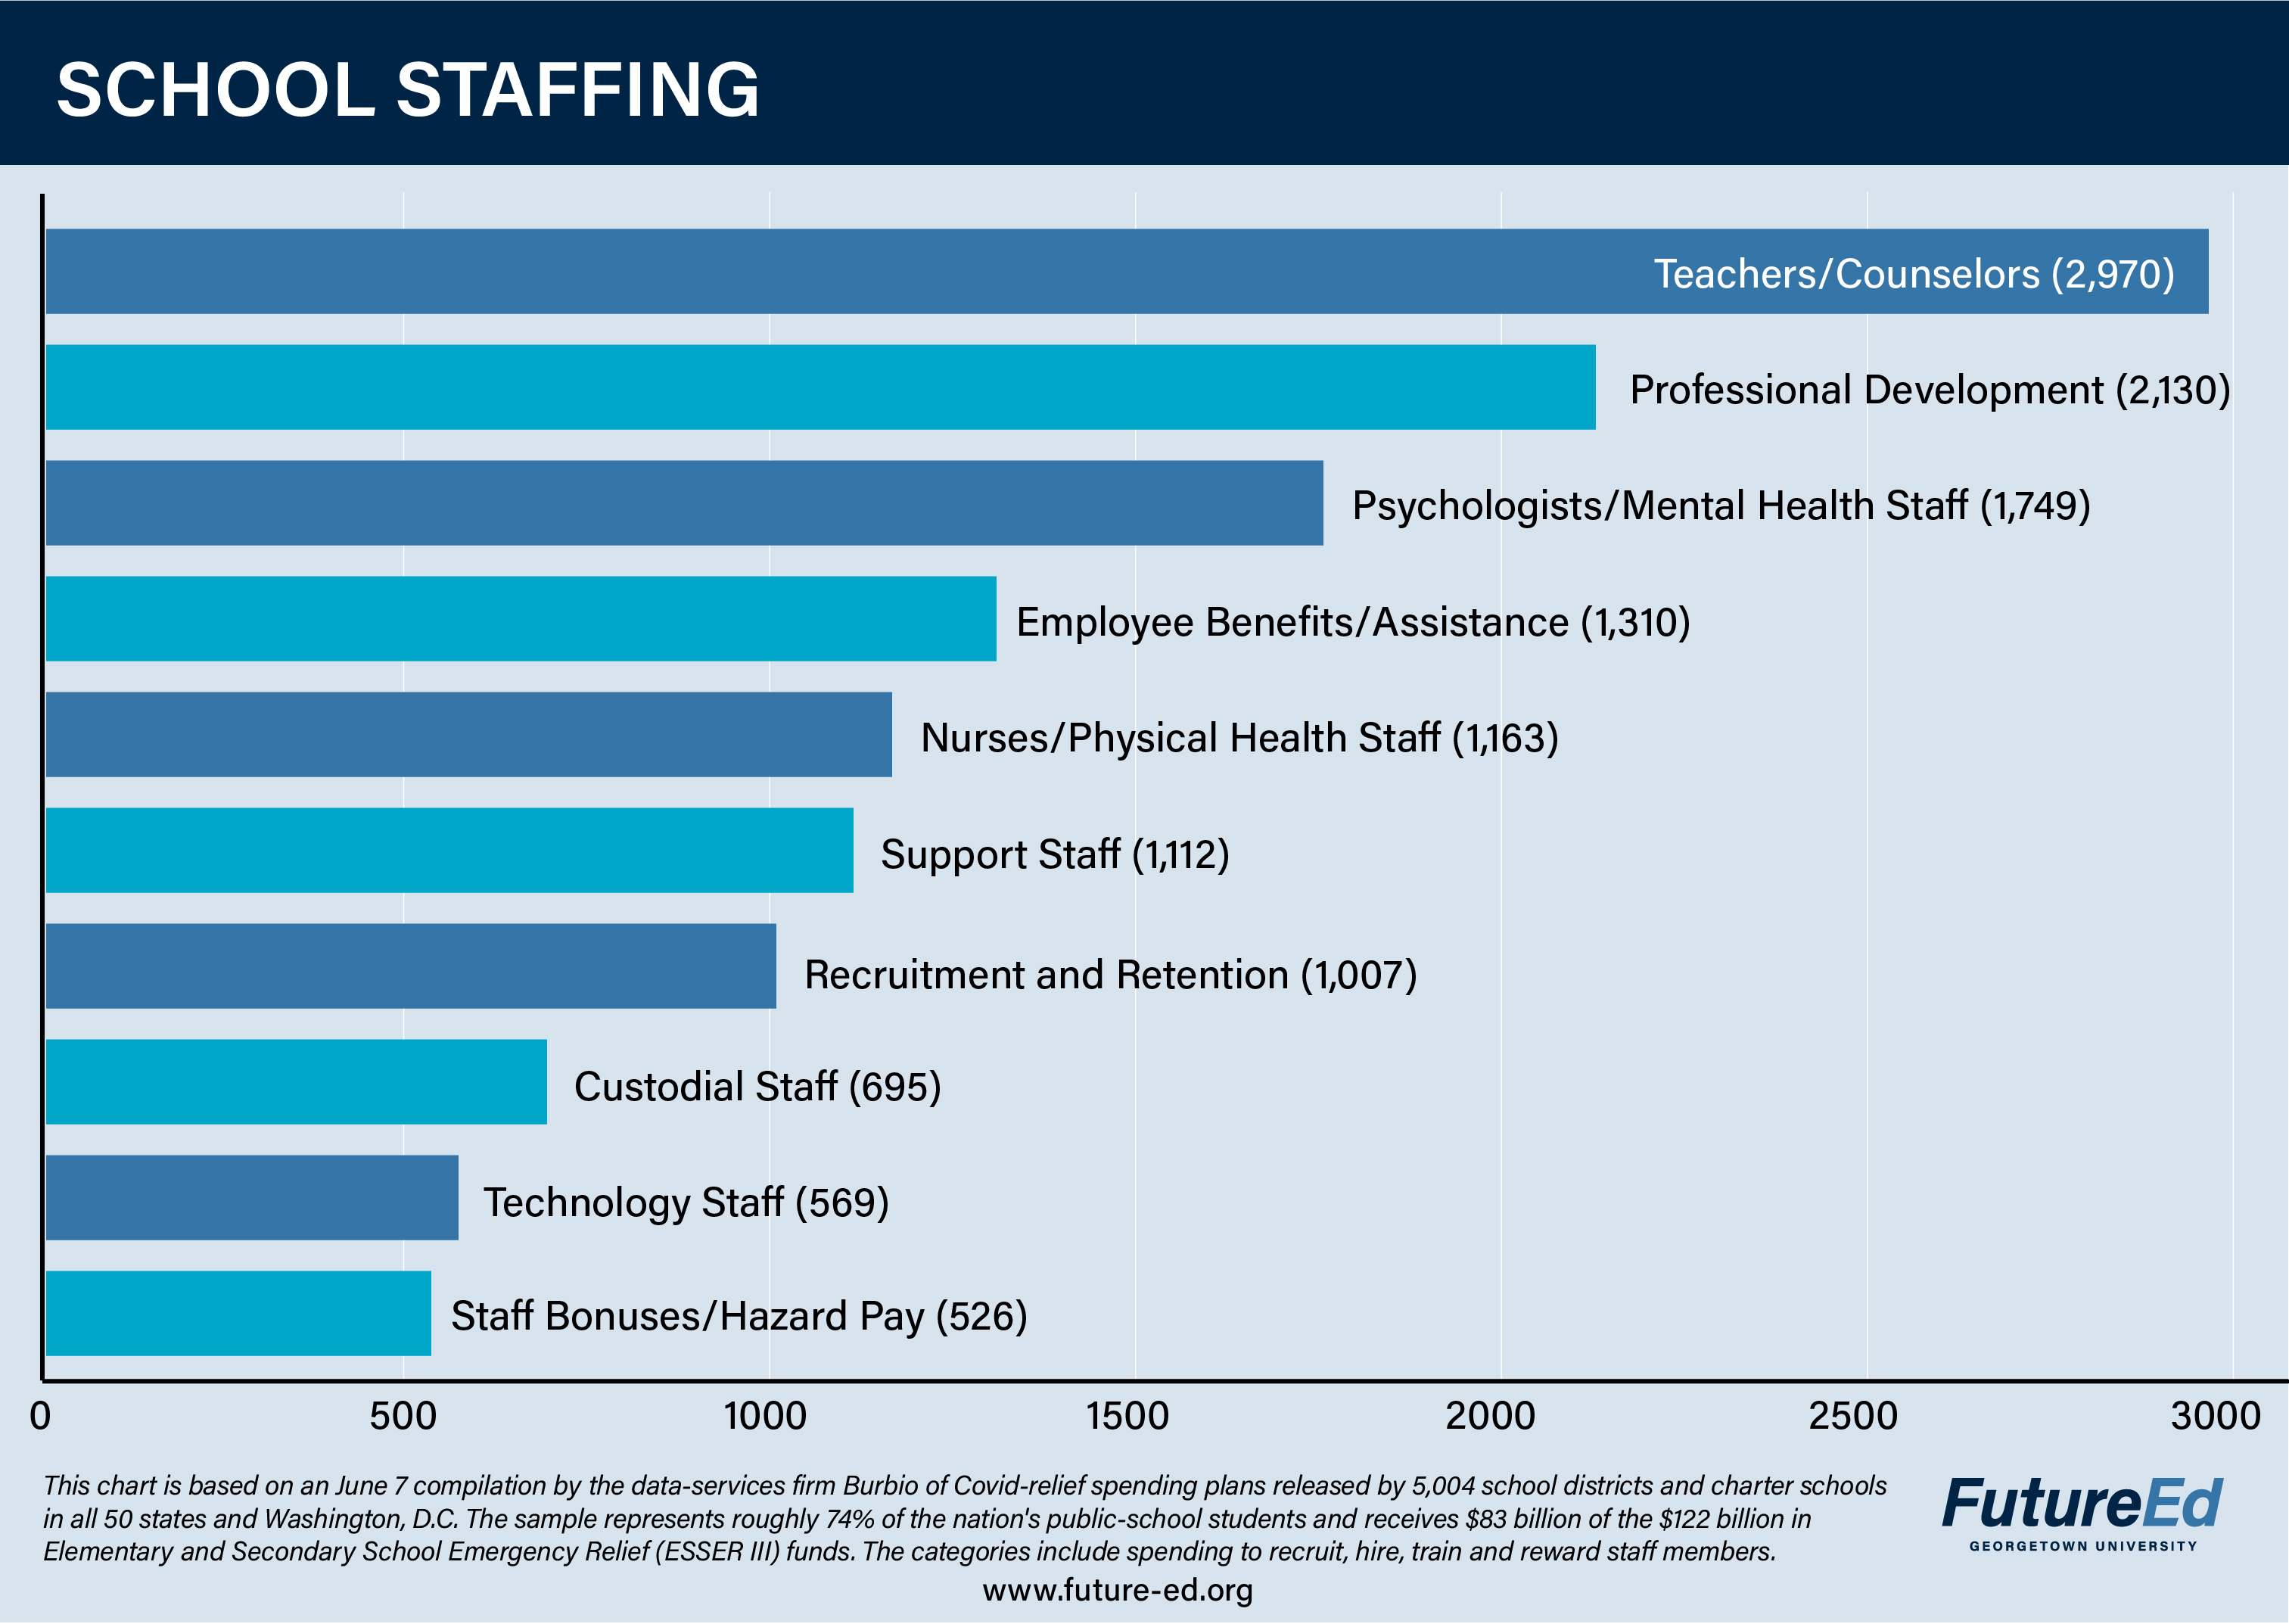 Chart: School Staffing. Teachers/Counselors: 2,970. Professional development: 2,130. Psychologists/Mental health staff: 1,749. Employee benefits/assistance: 1,310. Nurses/Physical health staff: 1,163. Support staff: 1,112. Recruitment and retention: 1,007. Custodial staff: 695. Technology staff: 569. Staff bonuses/hazard pay: 526. (This chart is based on a June 7 compilation by the data-services firm Burbio of Covid-relief spending plans released by 5,004 school districts and charter schools in all 50 states and Washington, D.C. The sample represents roughly 74% of the nation's public-school students and receives $83 billion of the $122 billion in Elementary and Secondary School Emergency Relief (ESSER III) funds. The categories include spending to recruit, hire, train and reward staff members.) Links to school staffing page. 